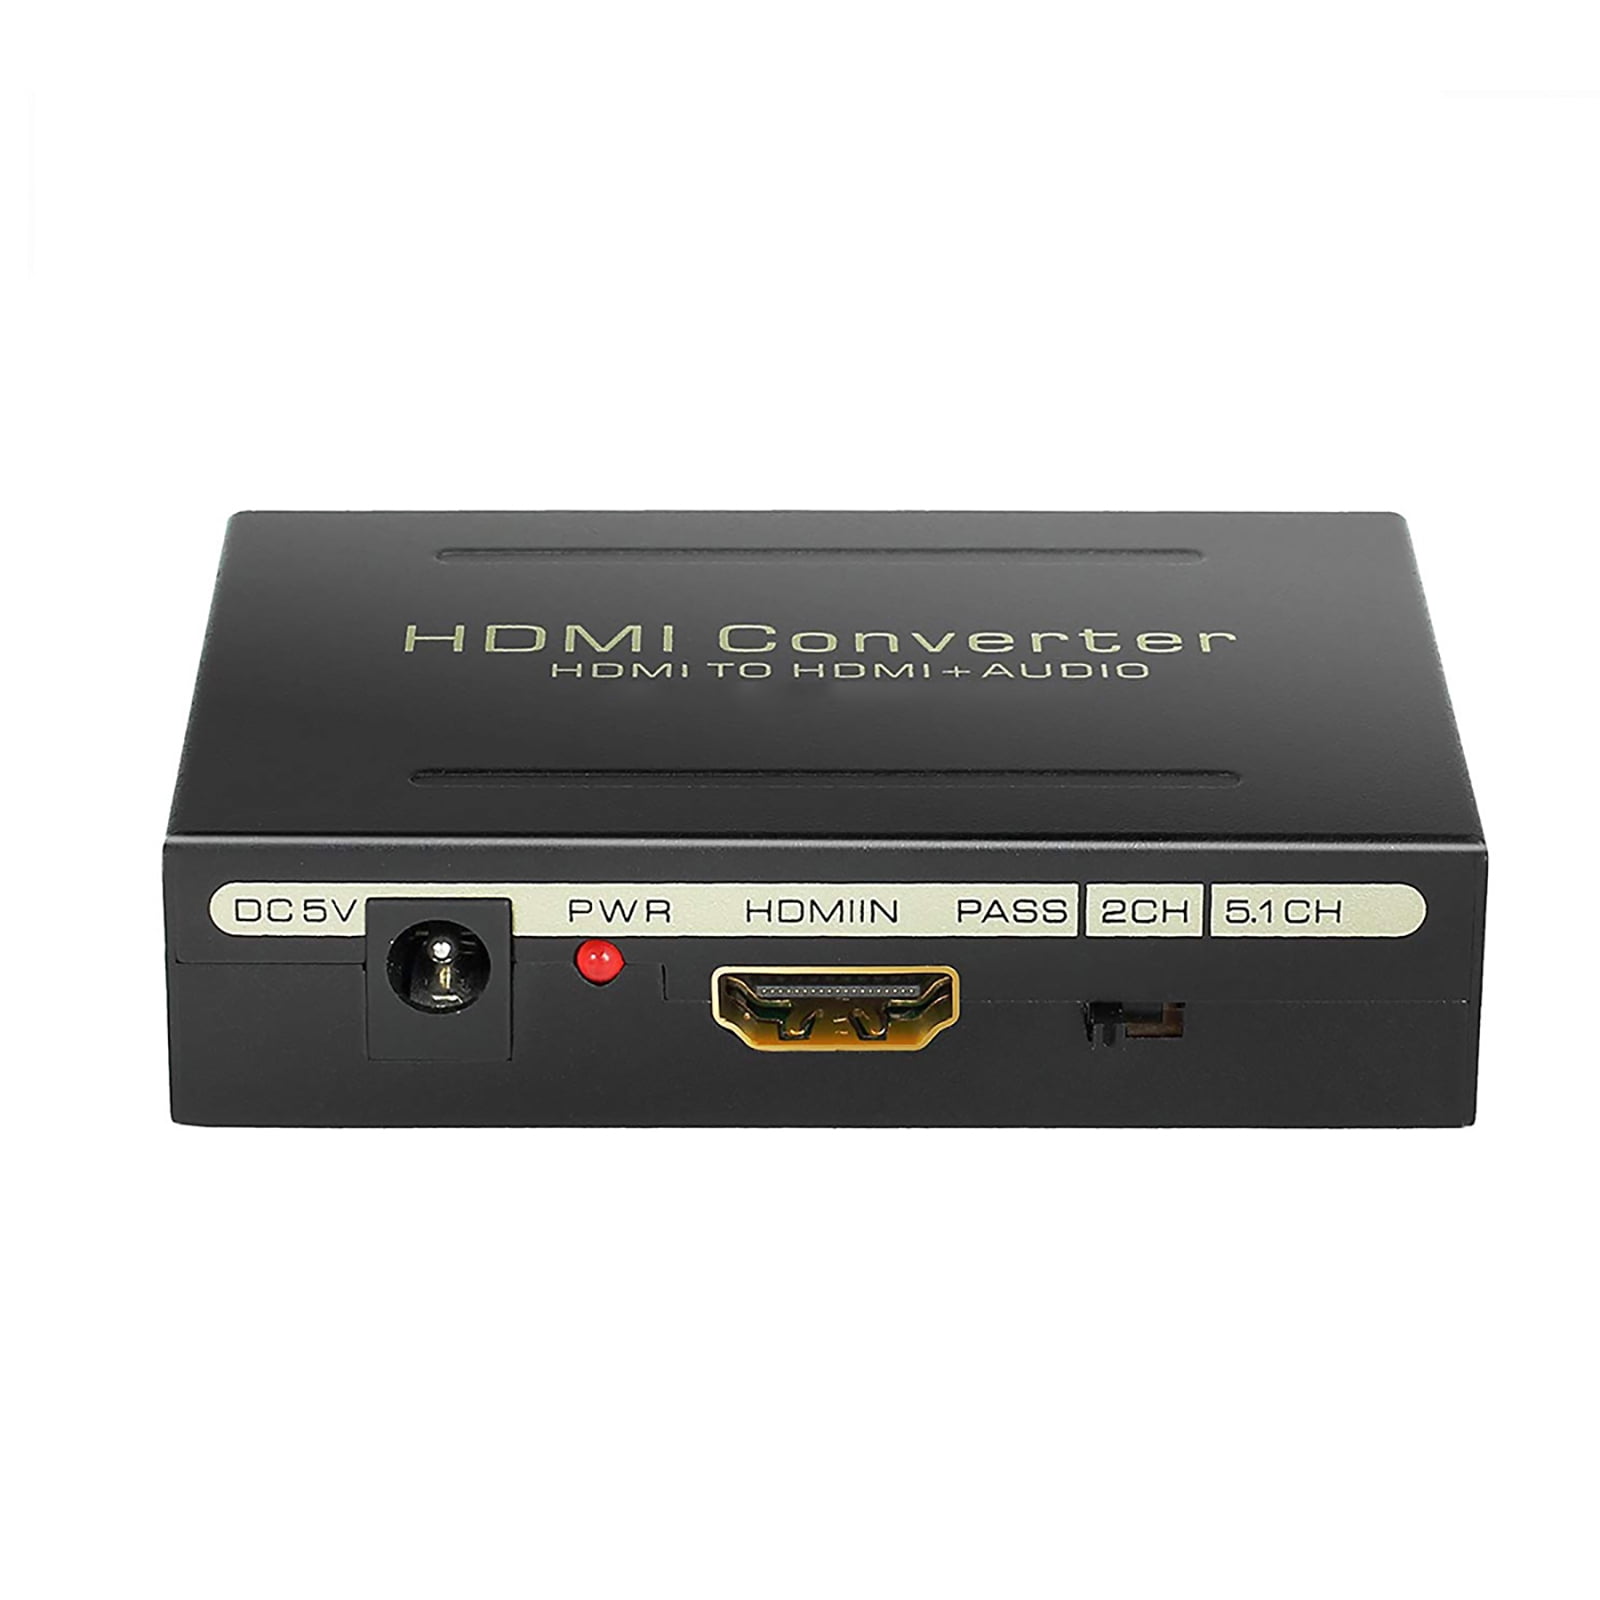 Optical SPDIF RCA L/R Audio Extractor Converter Adapter HDMI in to HMDI out